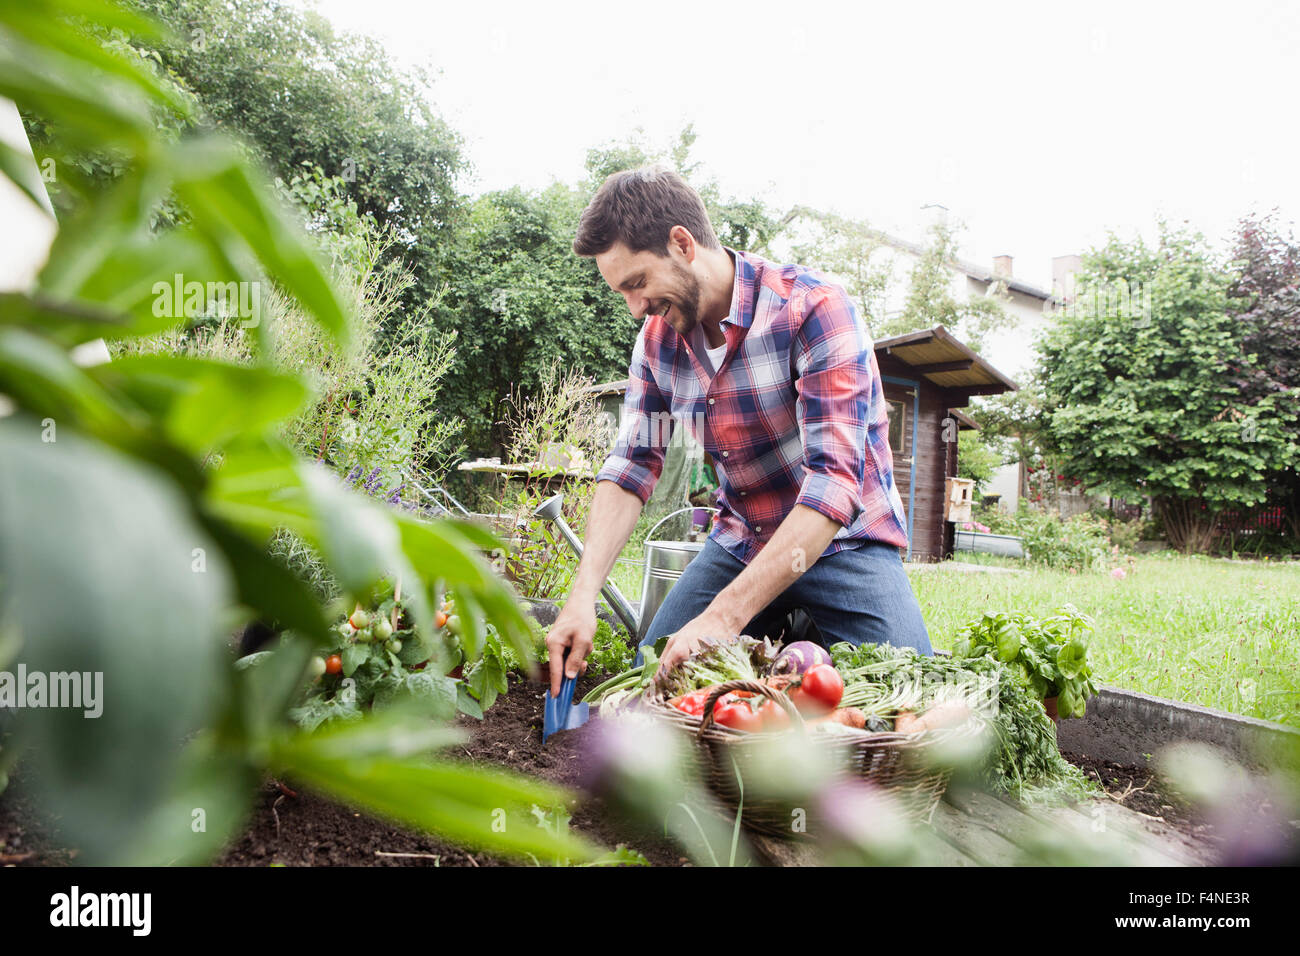 Man gardening in vegetable patch Stock Photo